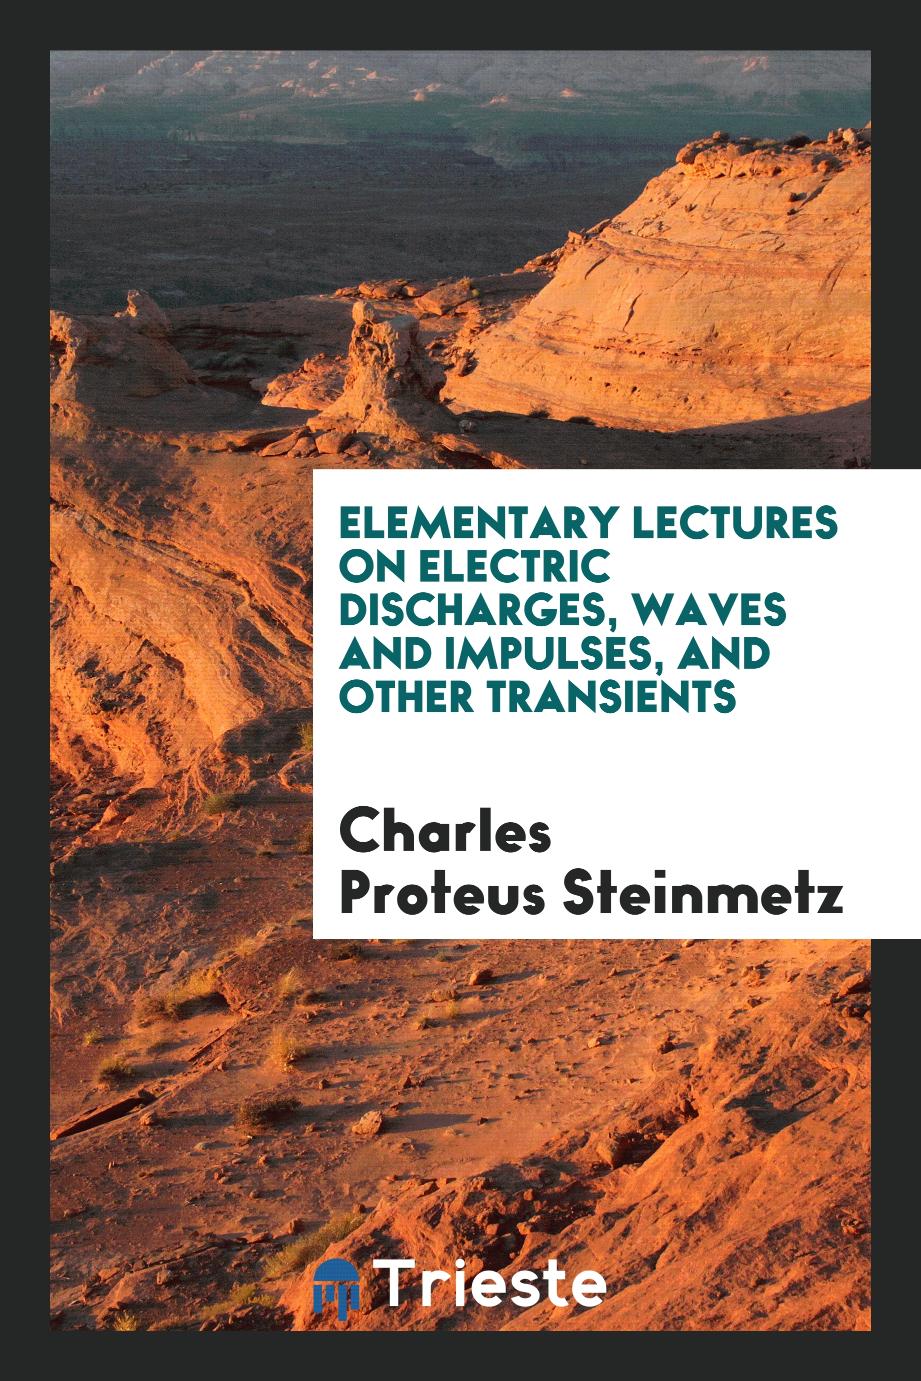 Elementary Lectures on Electric Discharges, Waves and Impulses, and Other Transients